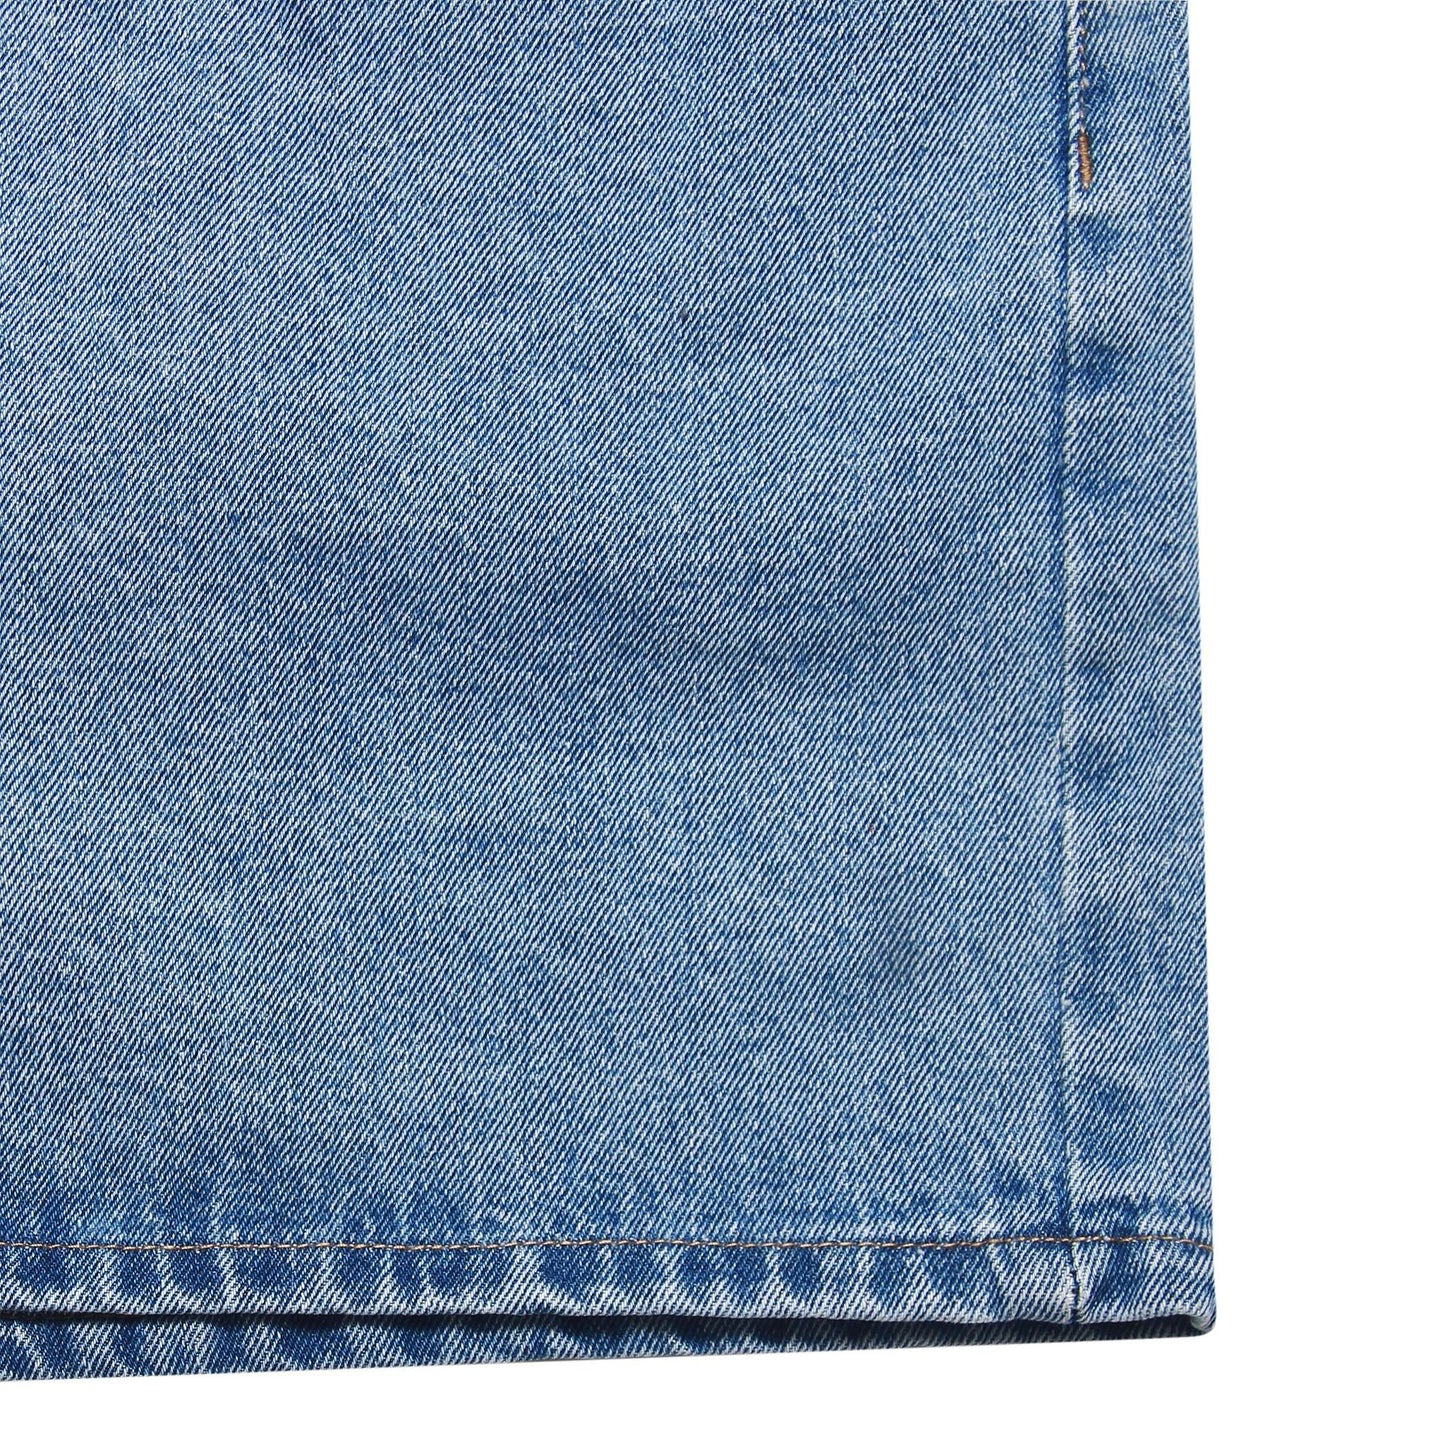 unearthed-washed-jeans-LIDER